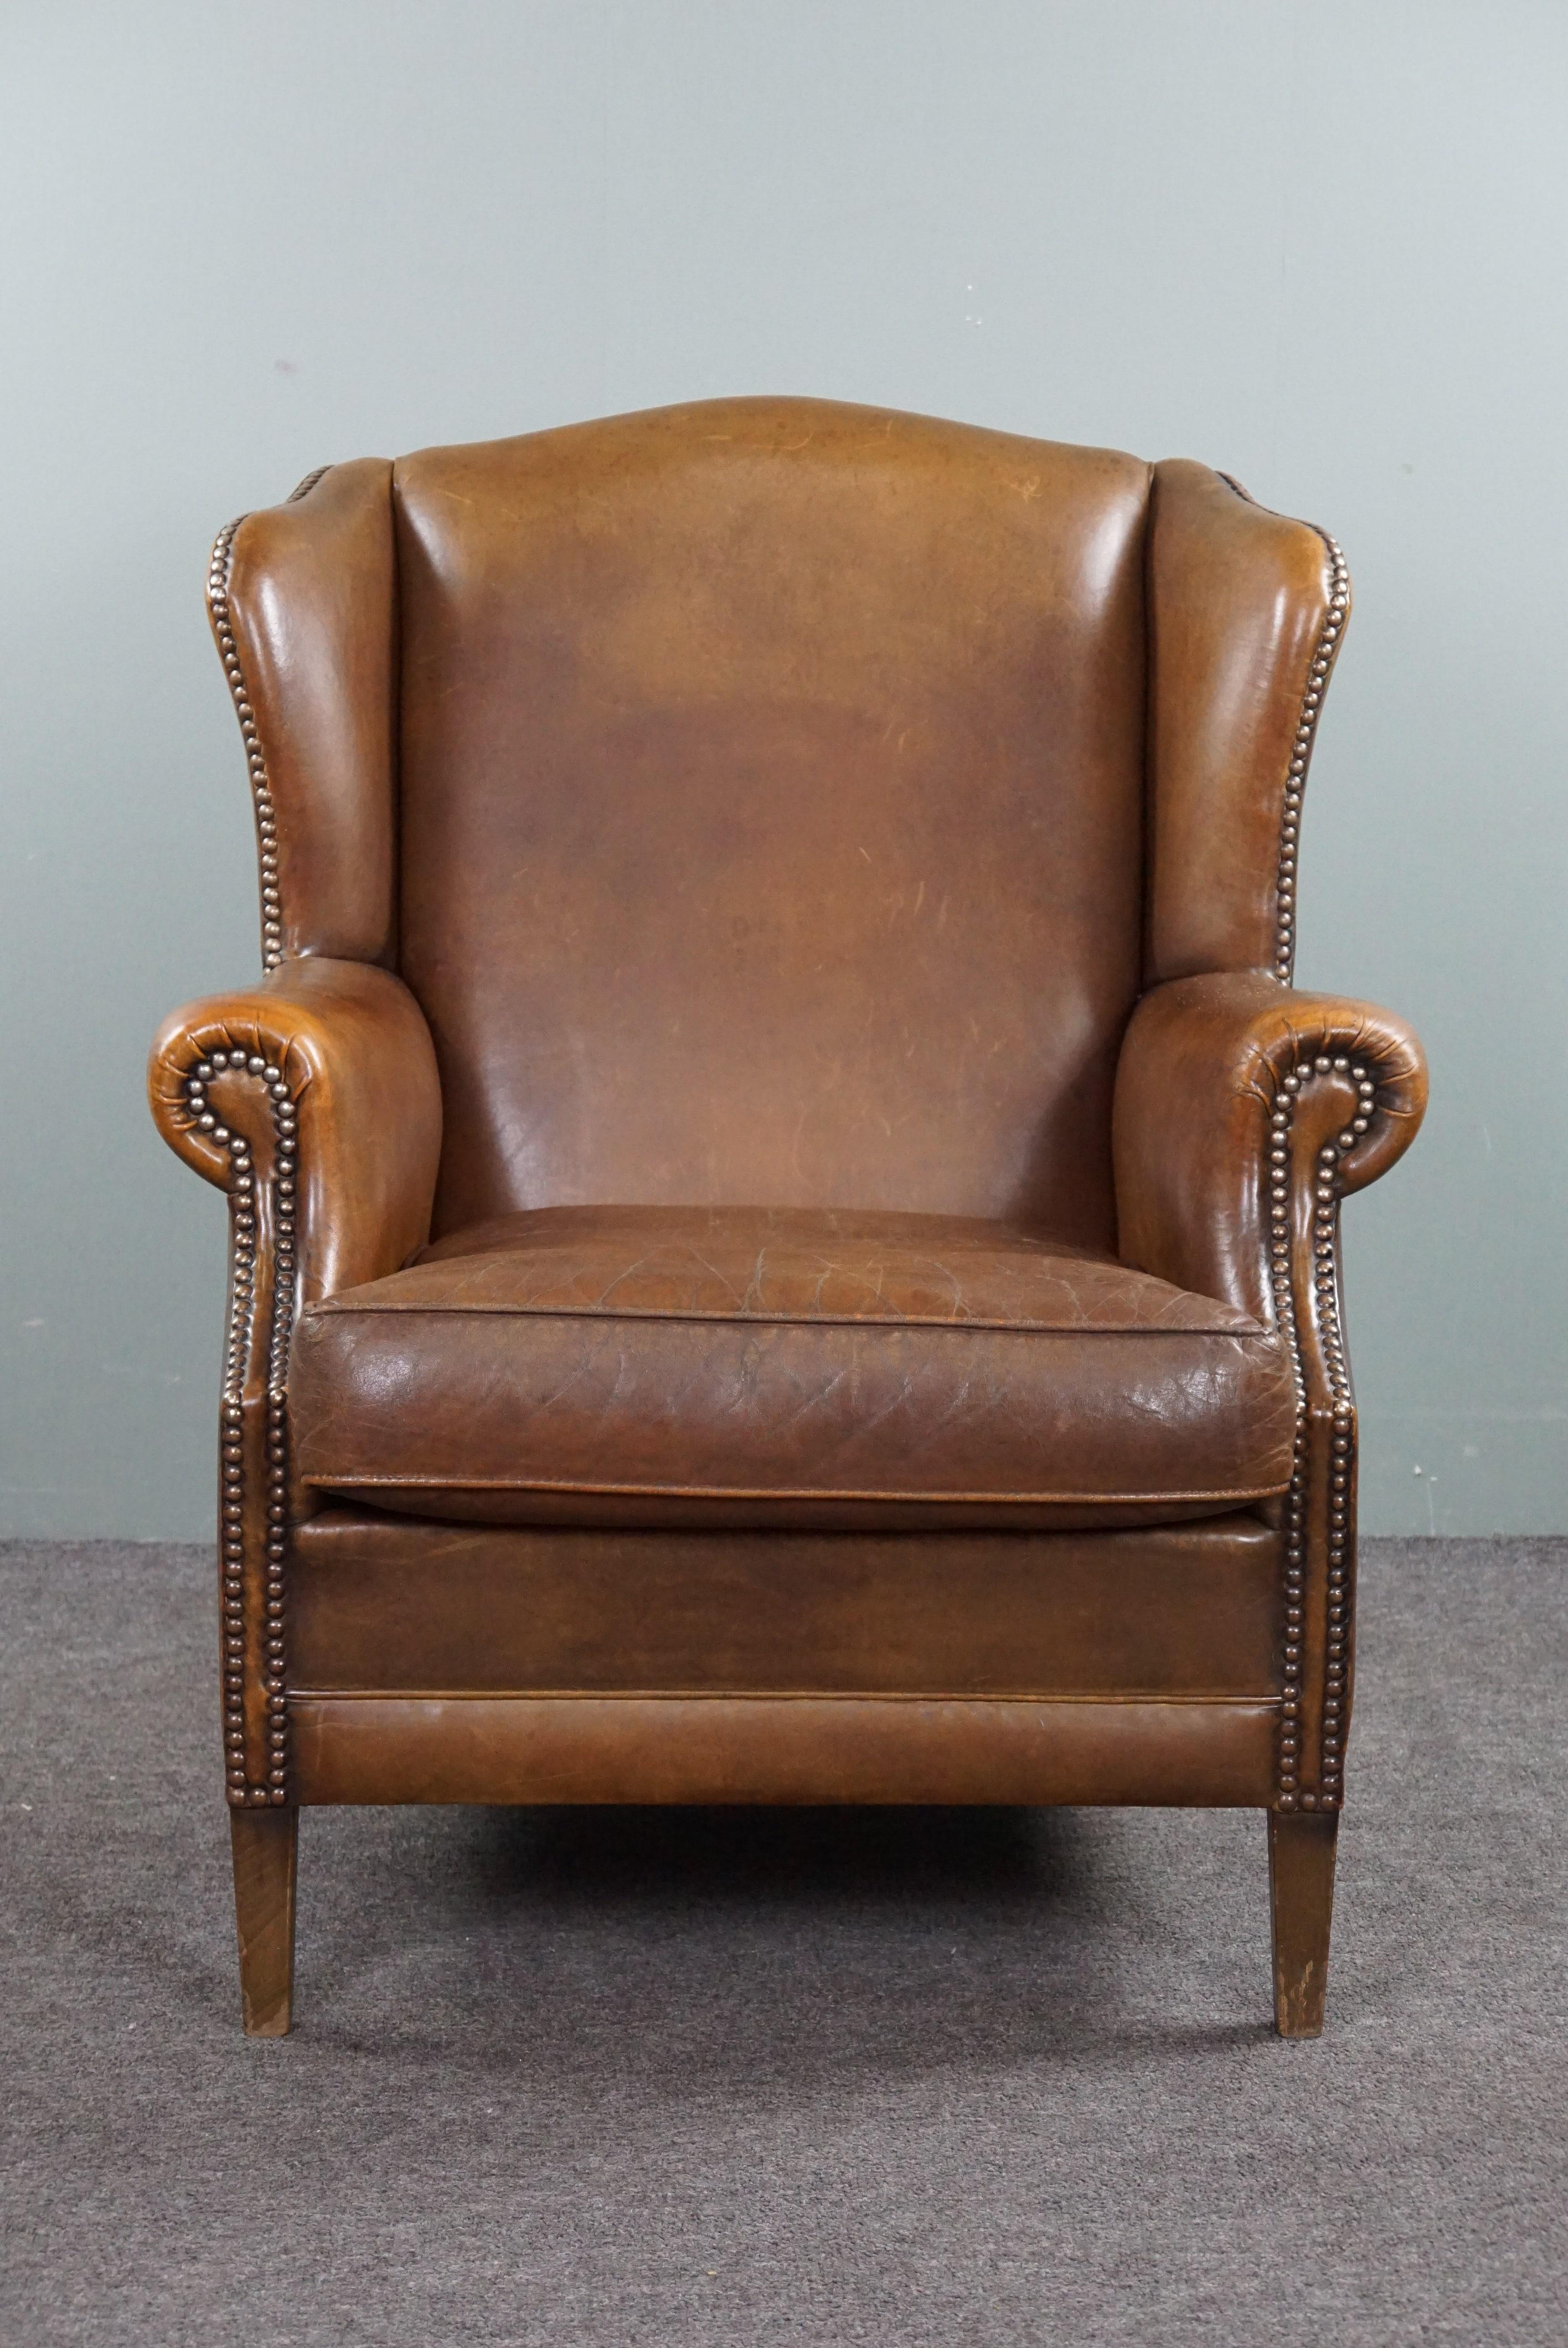 Offered is this beautifully colored speaking sheepskin leather wing chair.

This sturdy wing chair has a common appearance due to its color and design and can therefore be used in many interior types and places. The armchair is comfortable and is